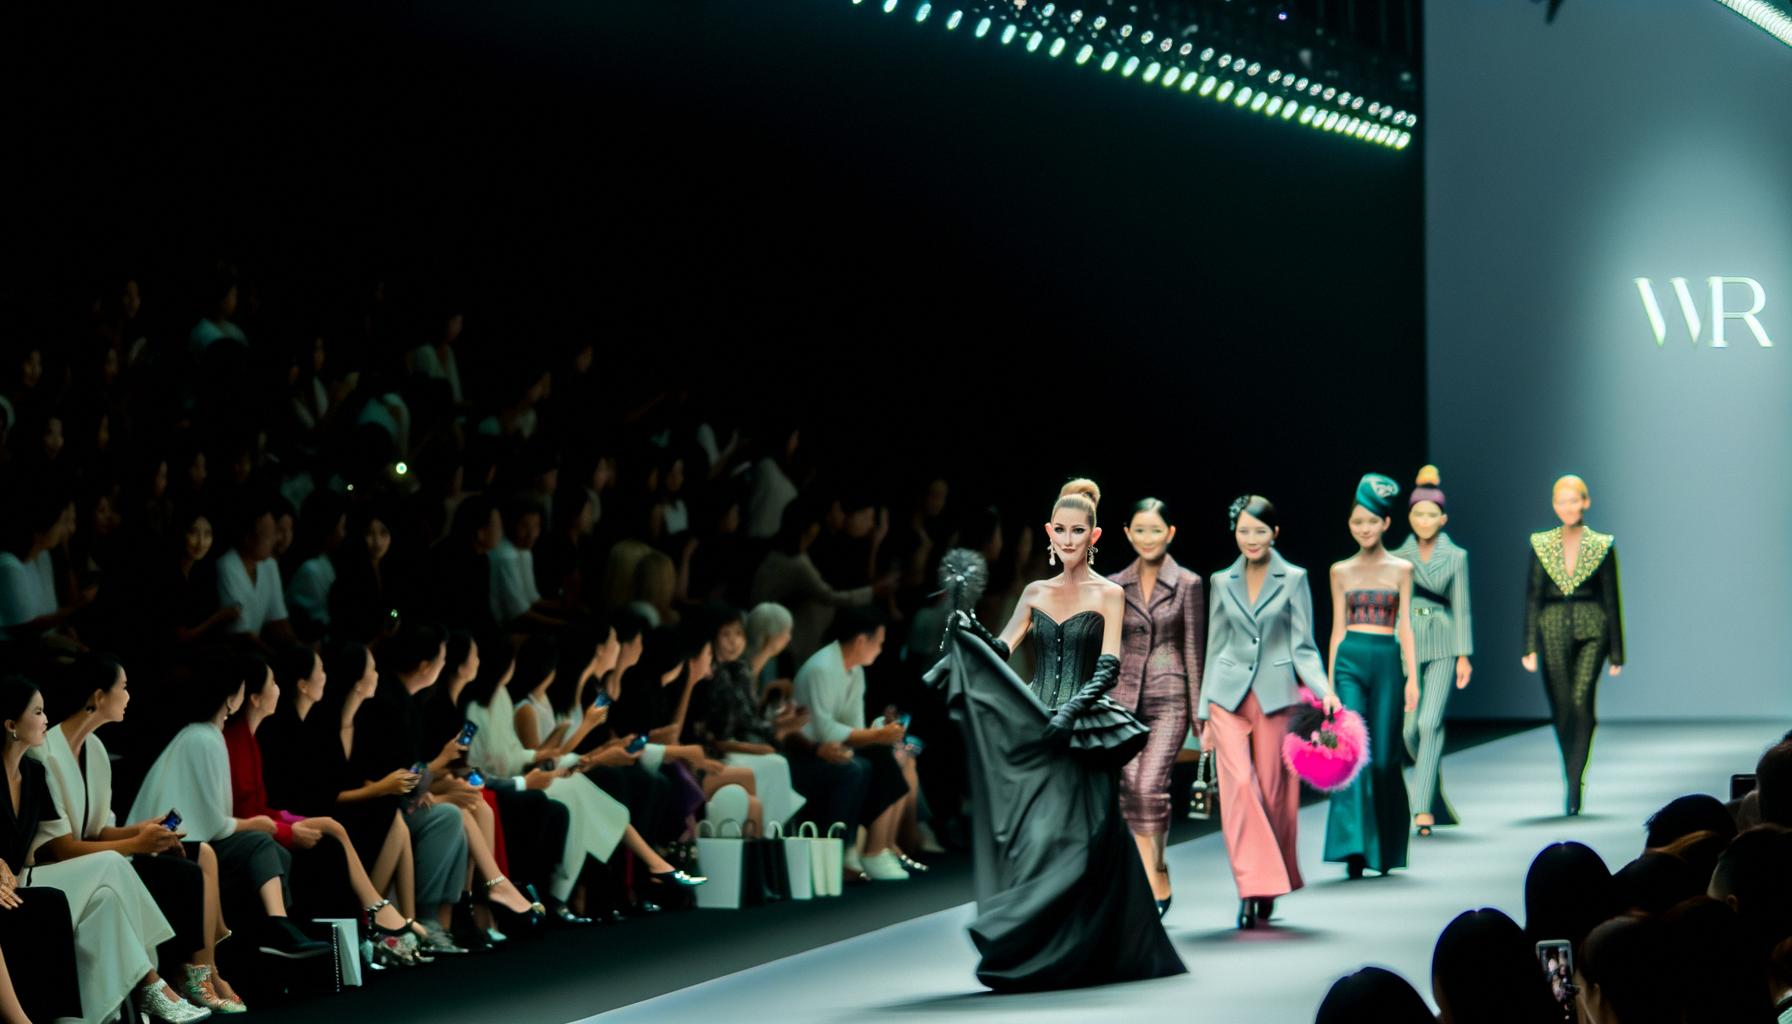 Paris Fashion Week highlights global cultural representation and celebrity engagement.